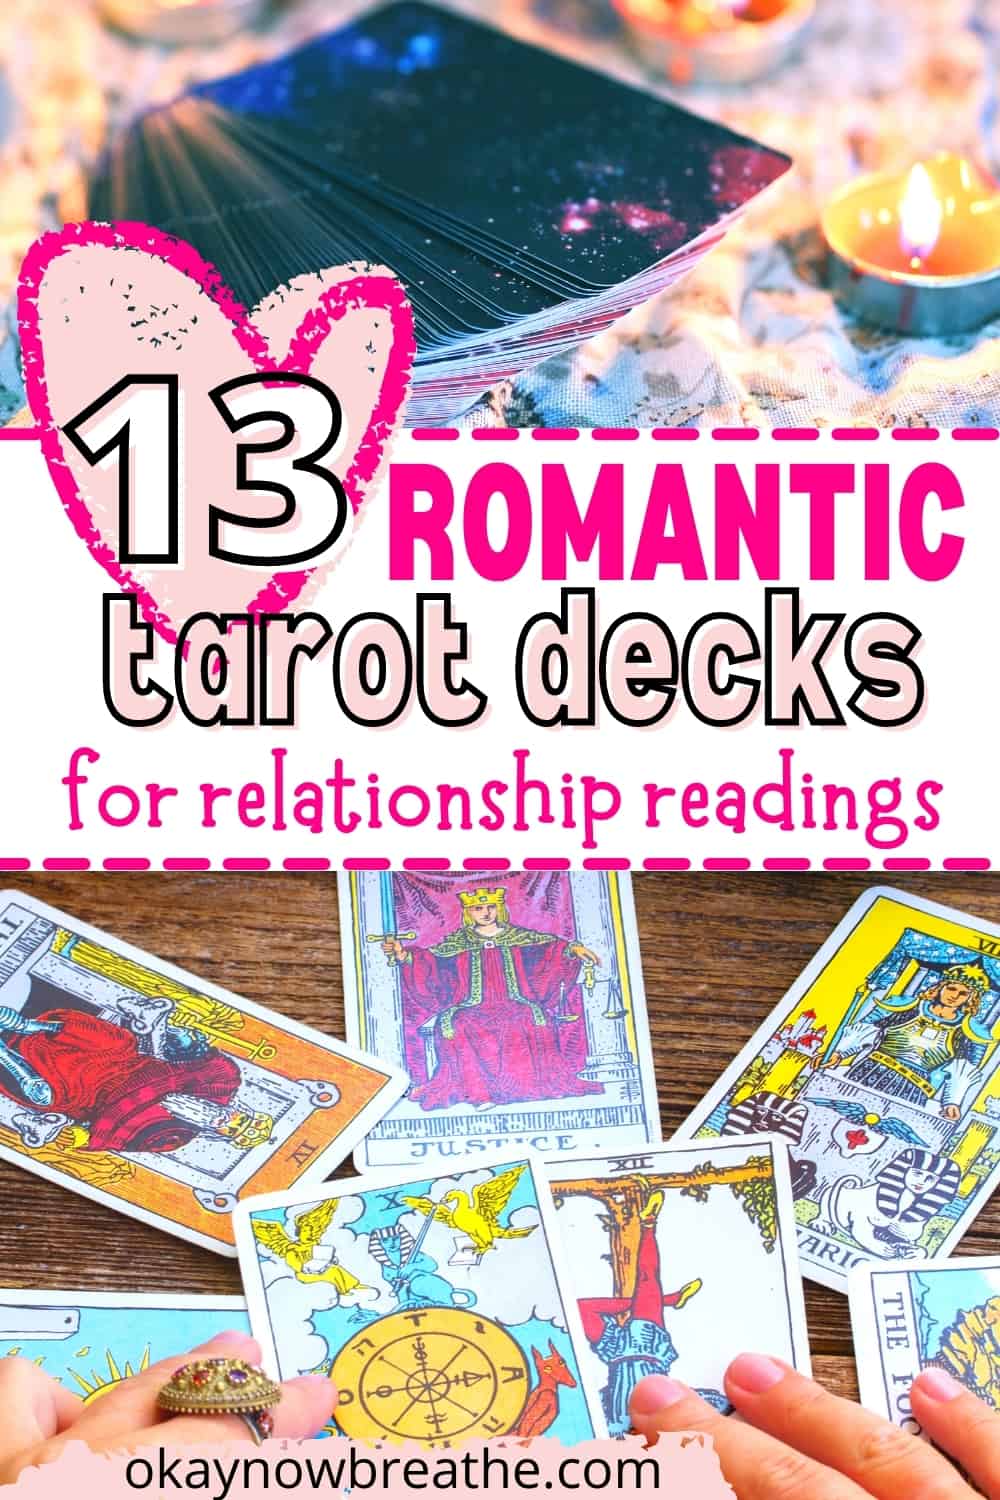 On top, there is a tarot deck face down next to lit tea light. In middle, 13 in a heart with text romantic tarot decks for relationship readings. Bottom, Rider Waite deck layed out.